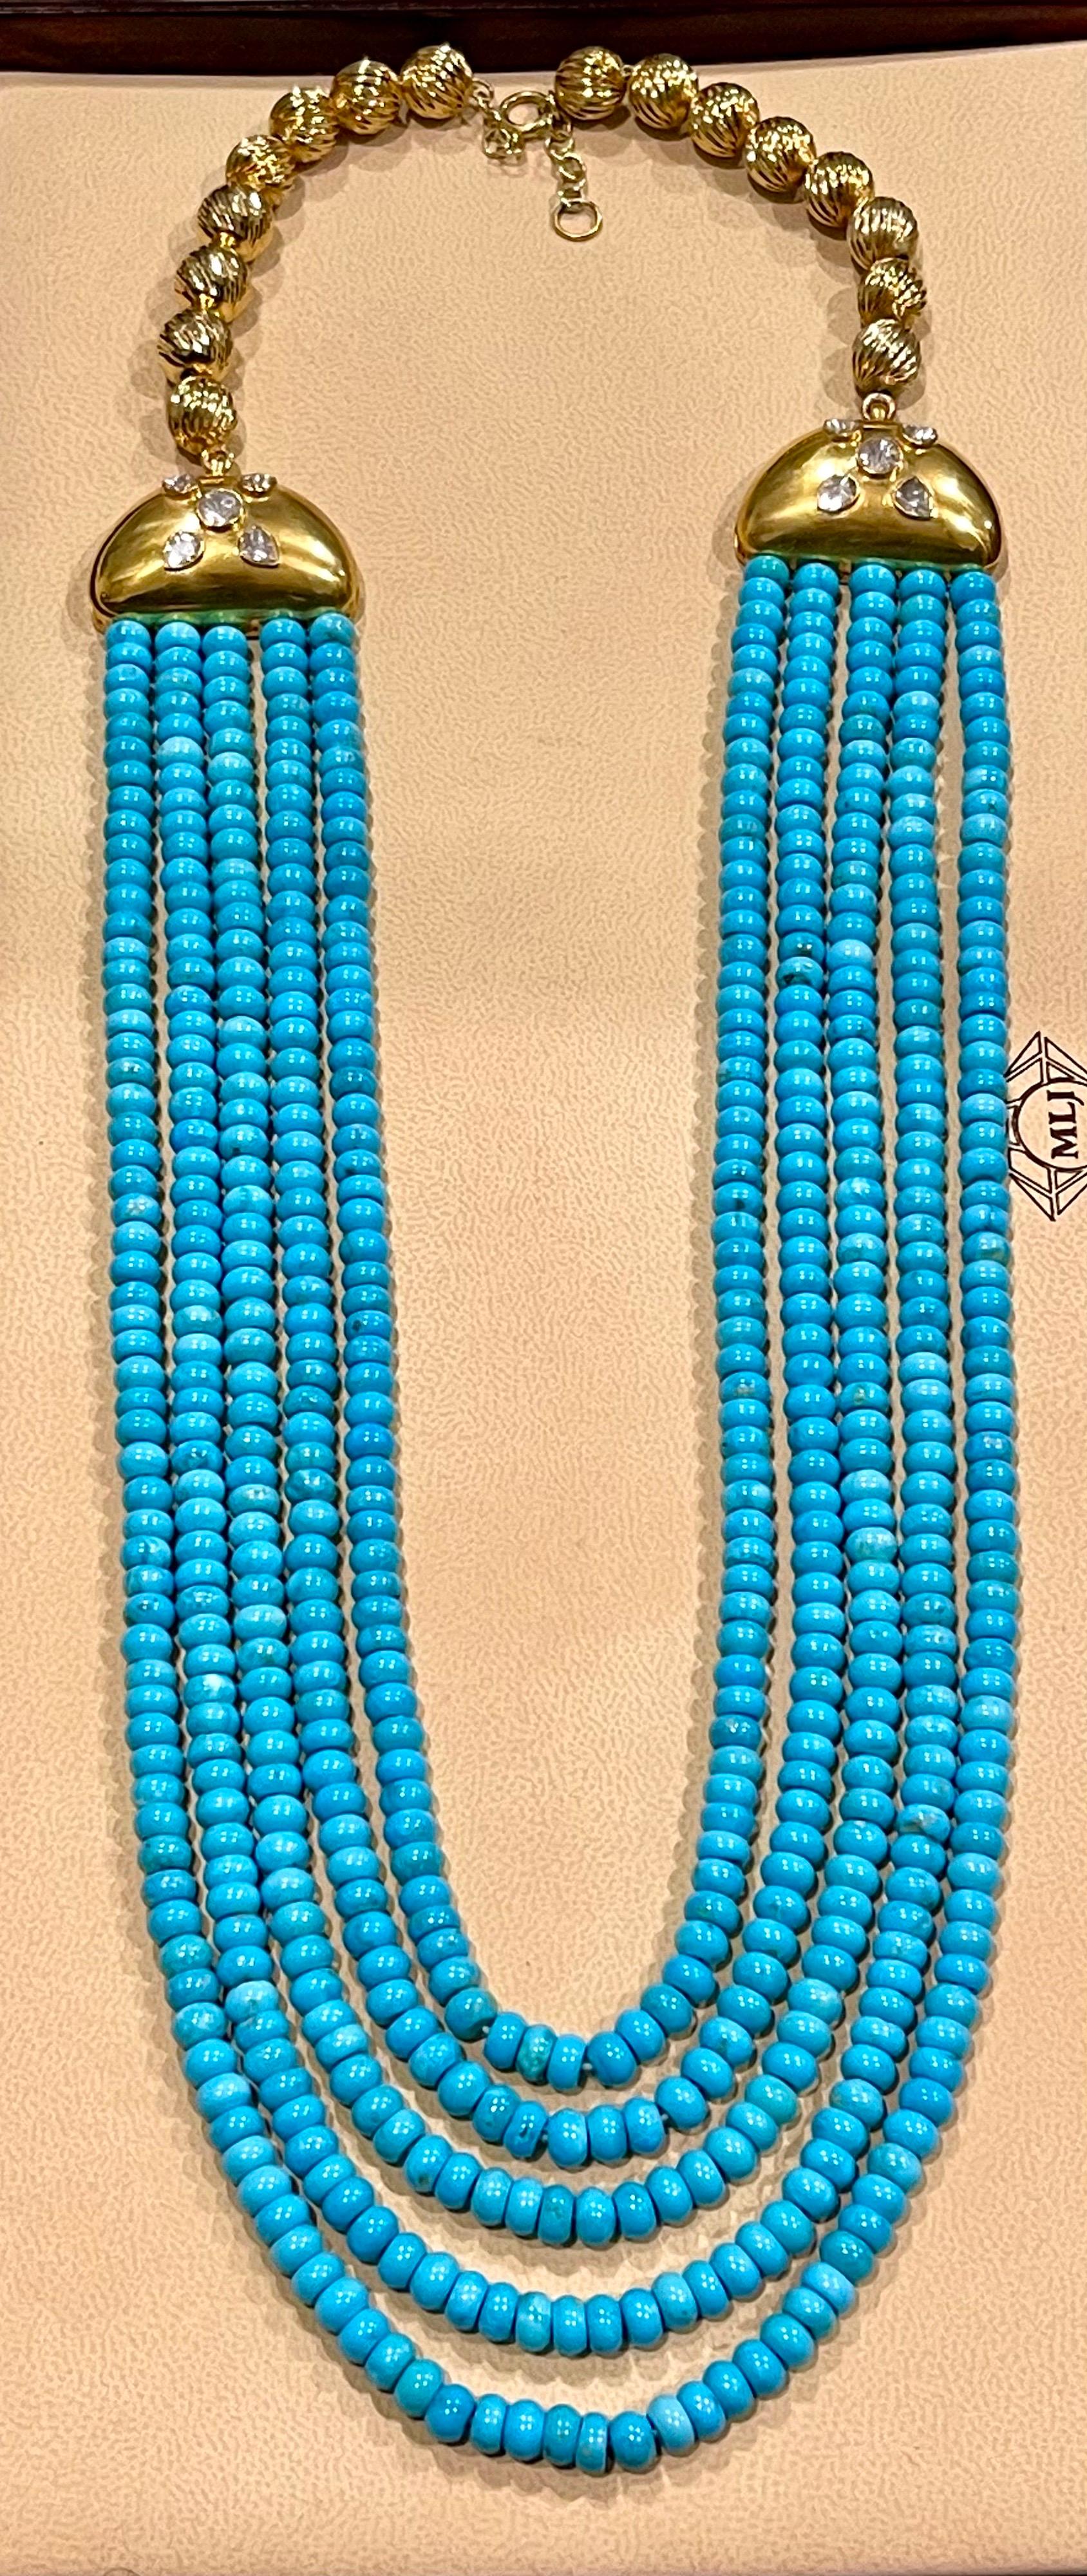 700 Ct Natural Sleeping Beauty Turquoise Necklace + Diamond 5 Strand 14 Kt Gold For Sale 4